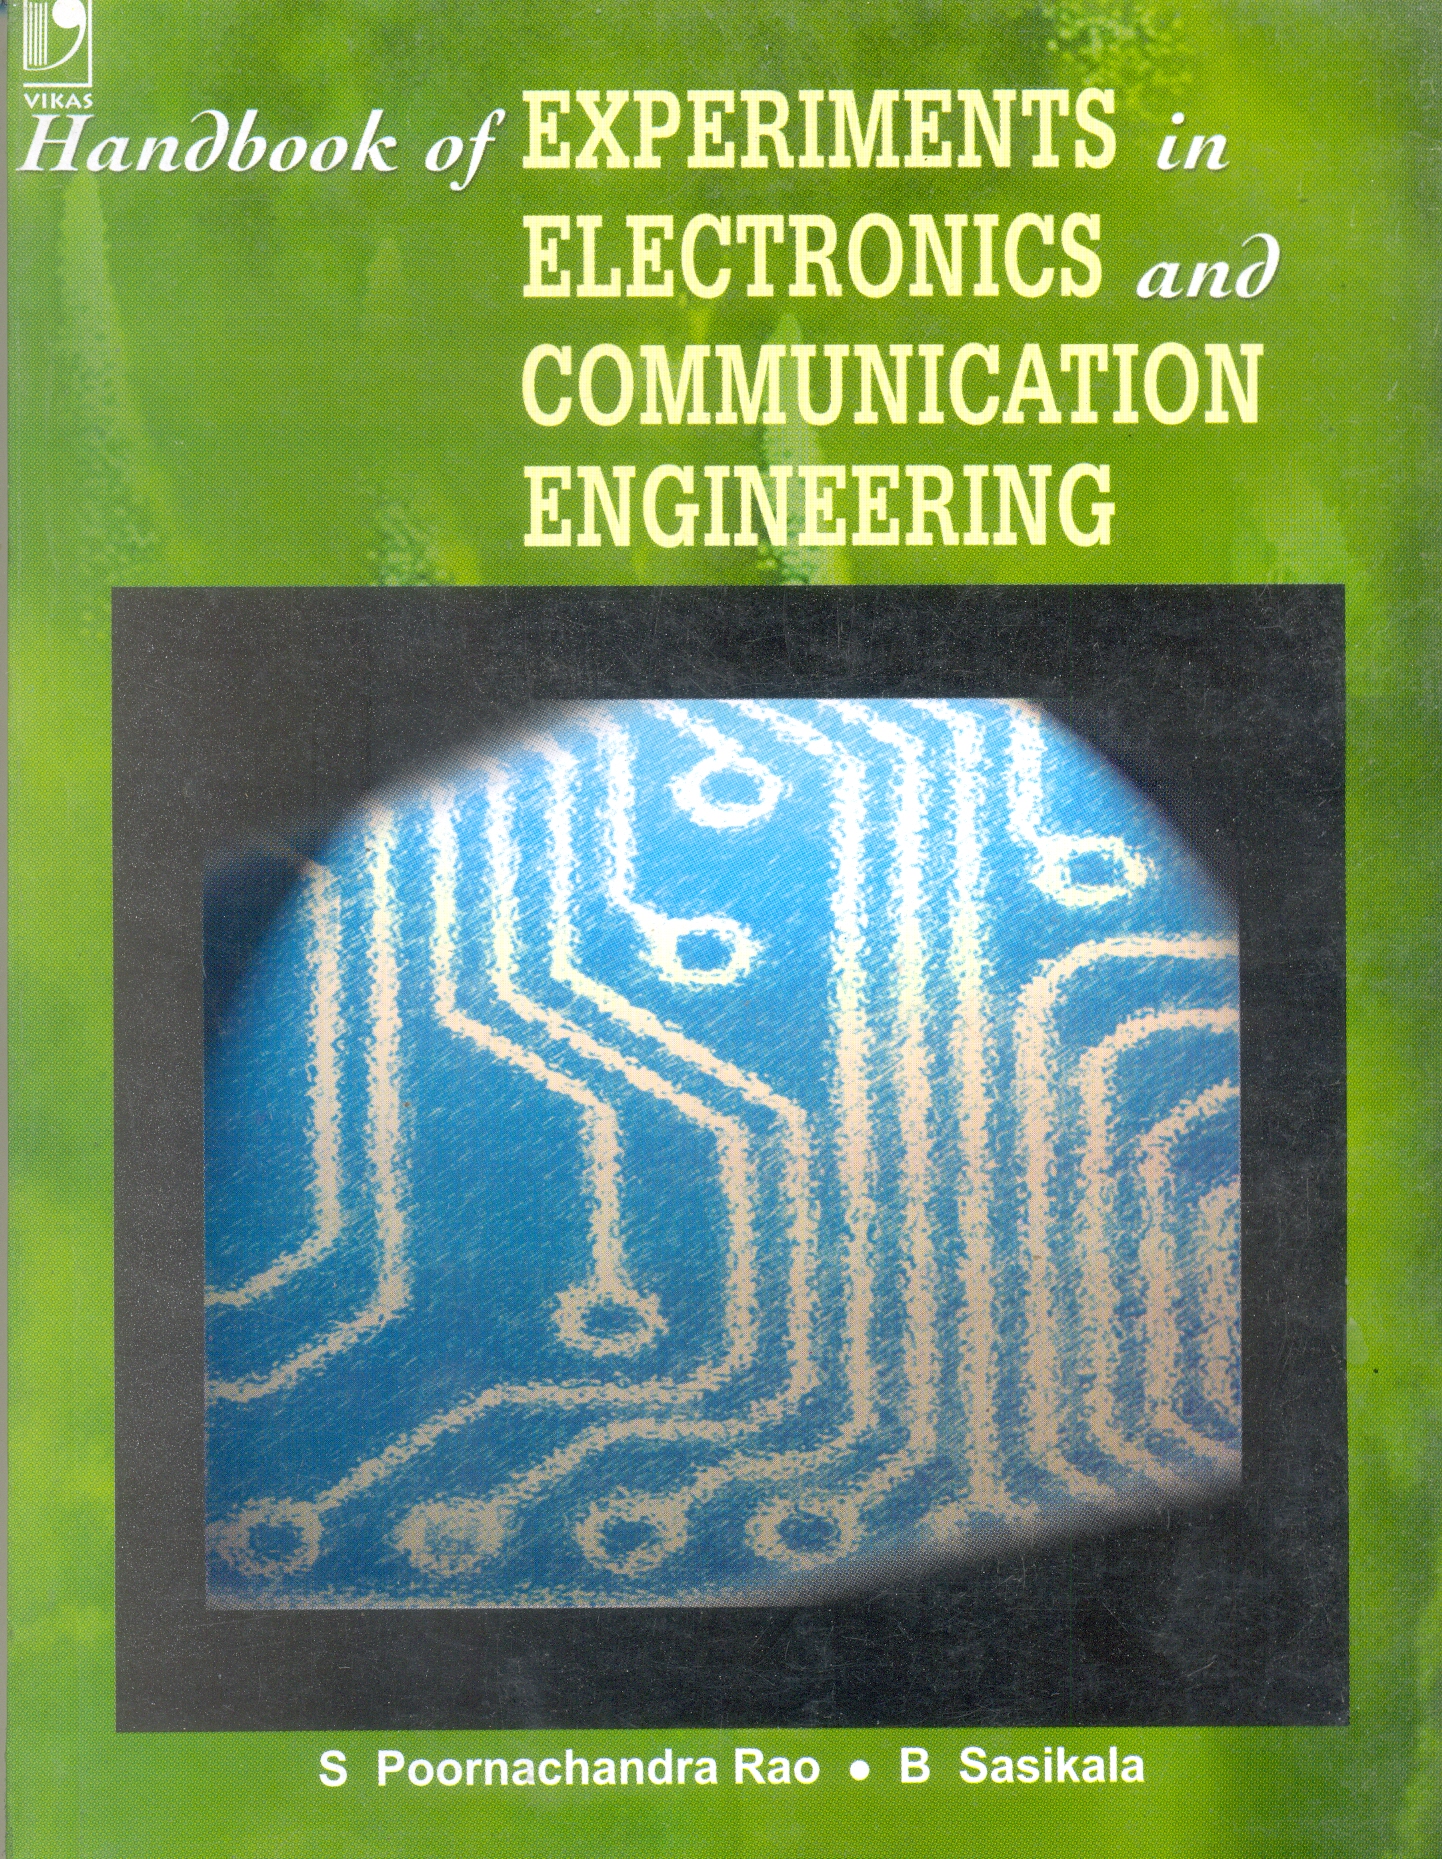 Handbook of Experiments in Electronics and Communication Engineering